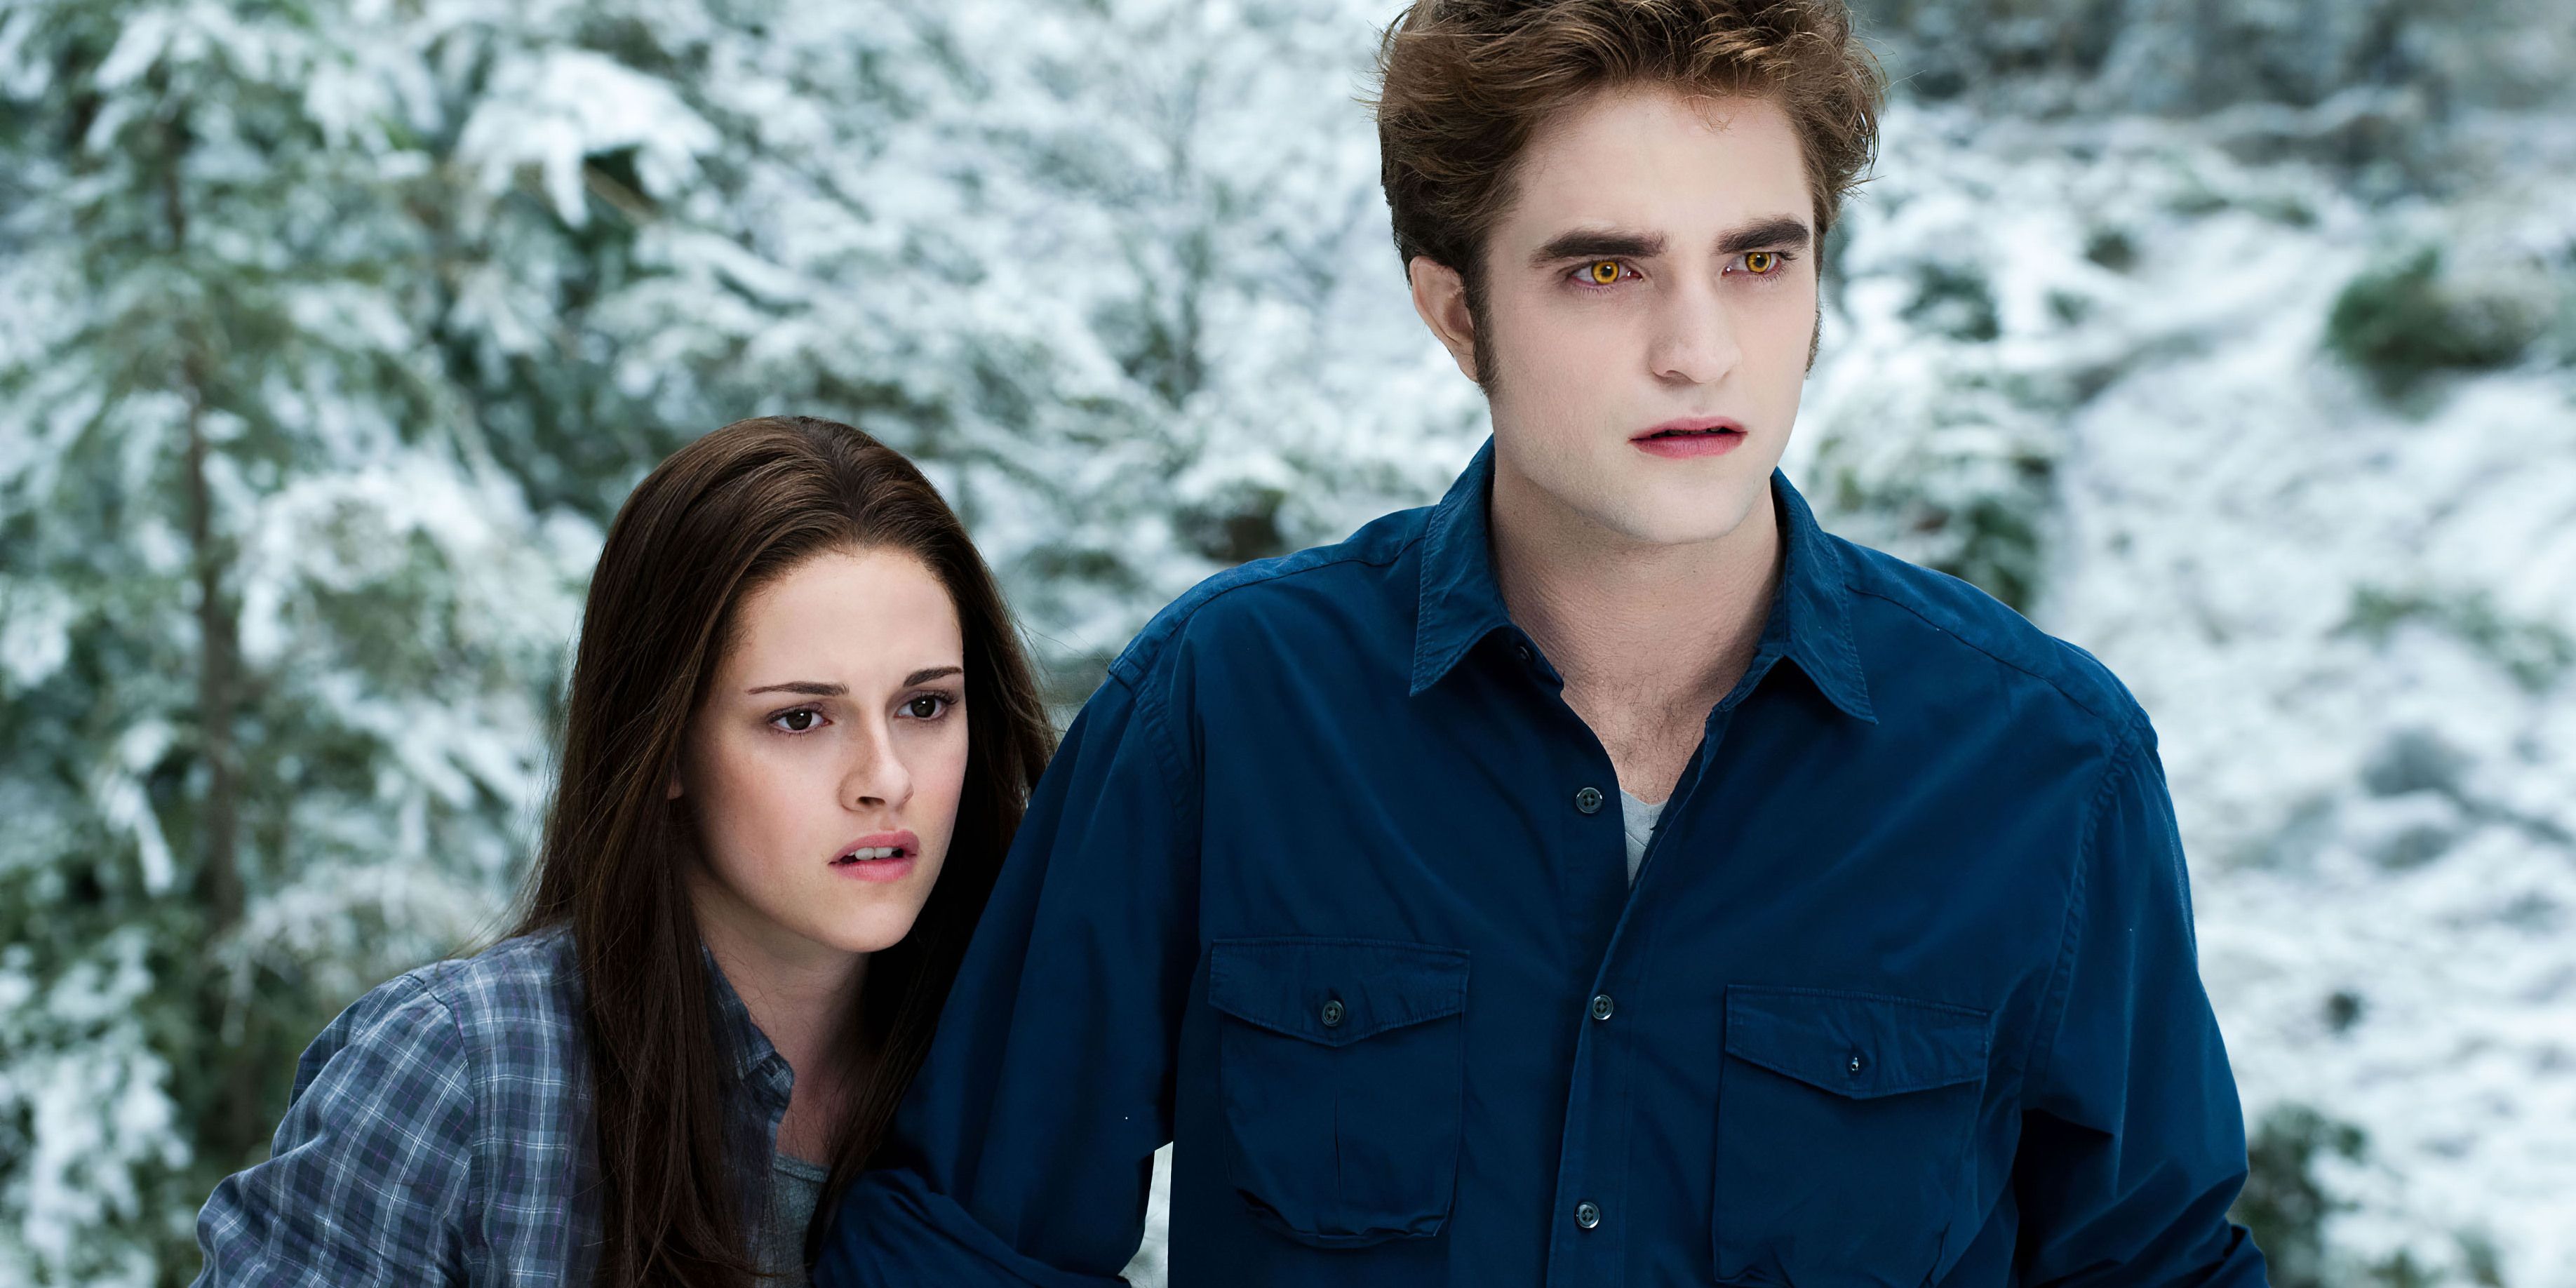 Twilight All the Main Romances From The Series Ranked